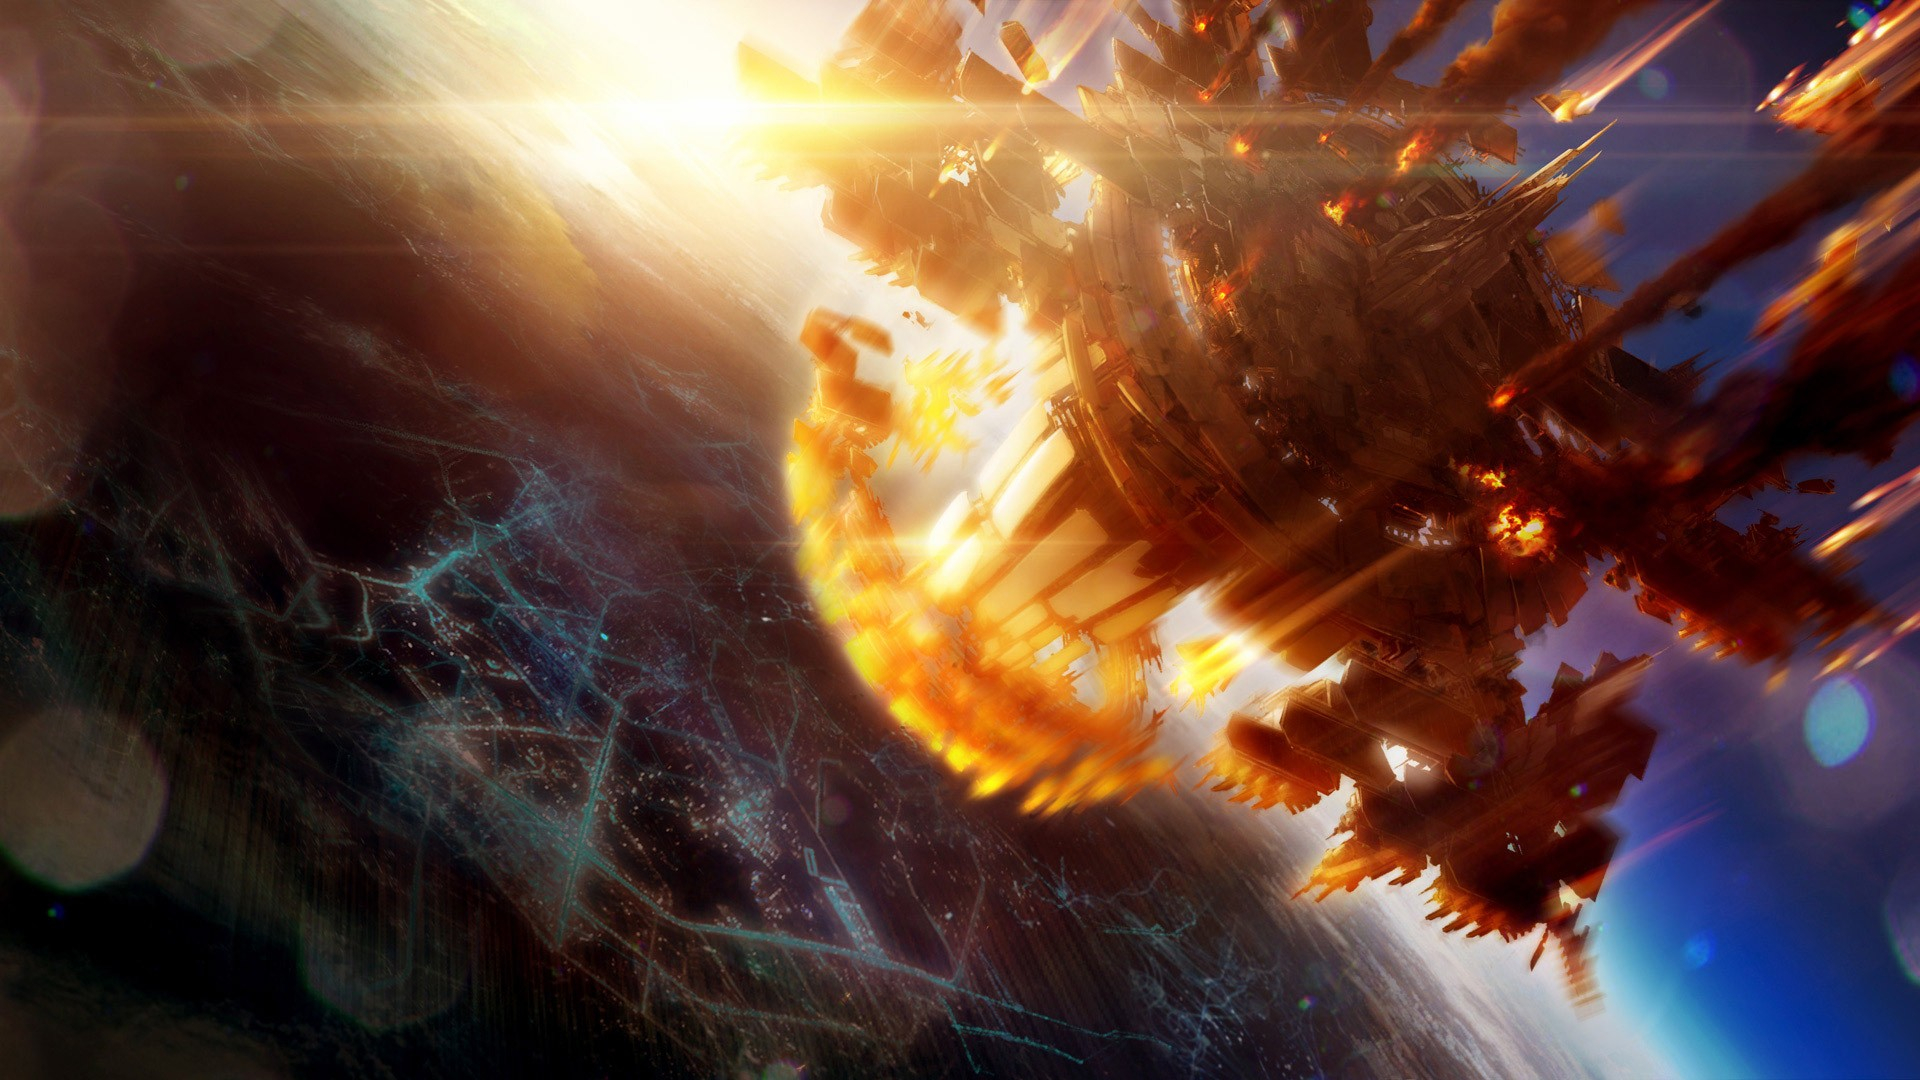 1920x1080 Wallpaper : sunlight, sky, Earth, world, atmosphere, explosion, Stargate Atlantis, flame, screenshot, px, computer wallpaper, special effects, outer space, cg artwork, visual effects CoolWallpapers 819178 HD Wallpapers